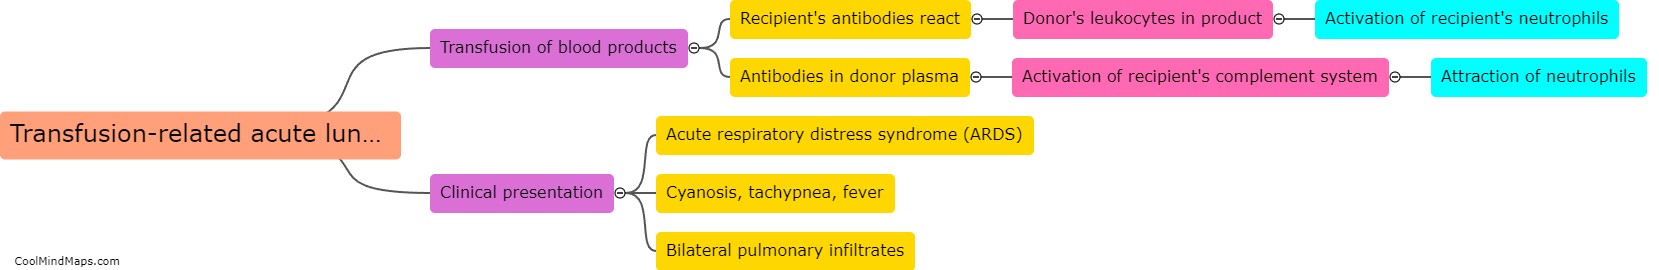 How can transfusion-related acute lung injury occur?